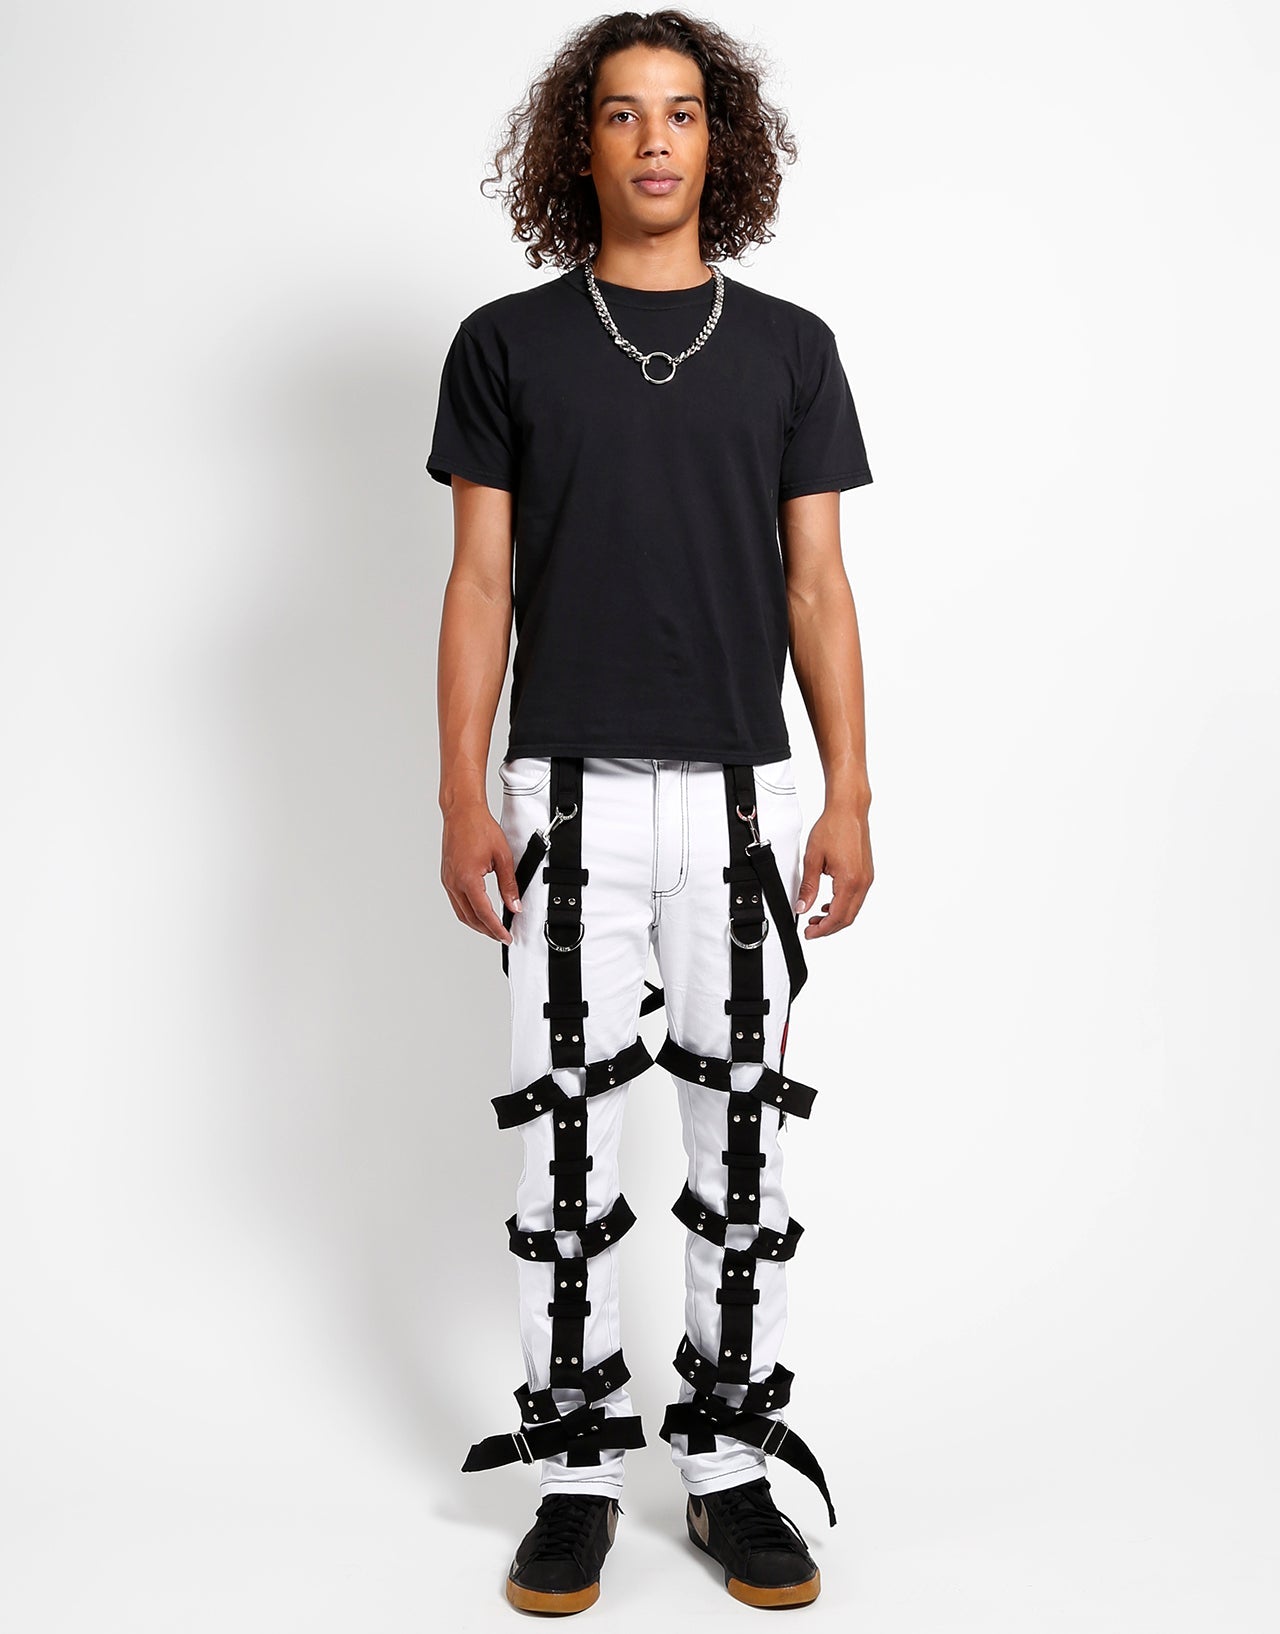 THE HARNESS PANT